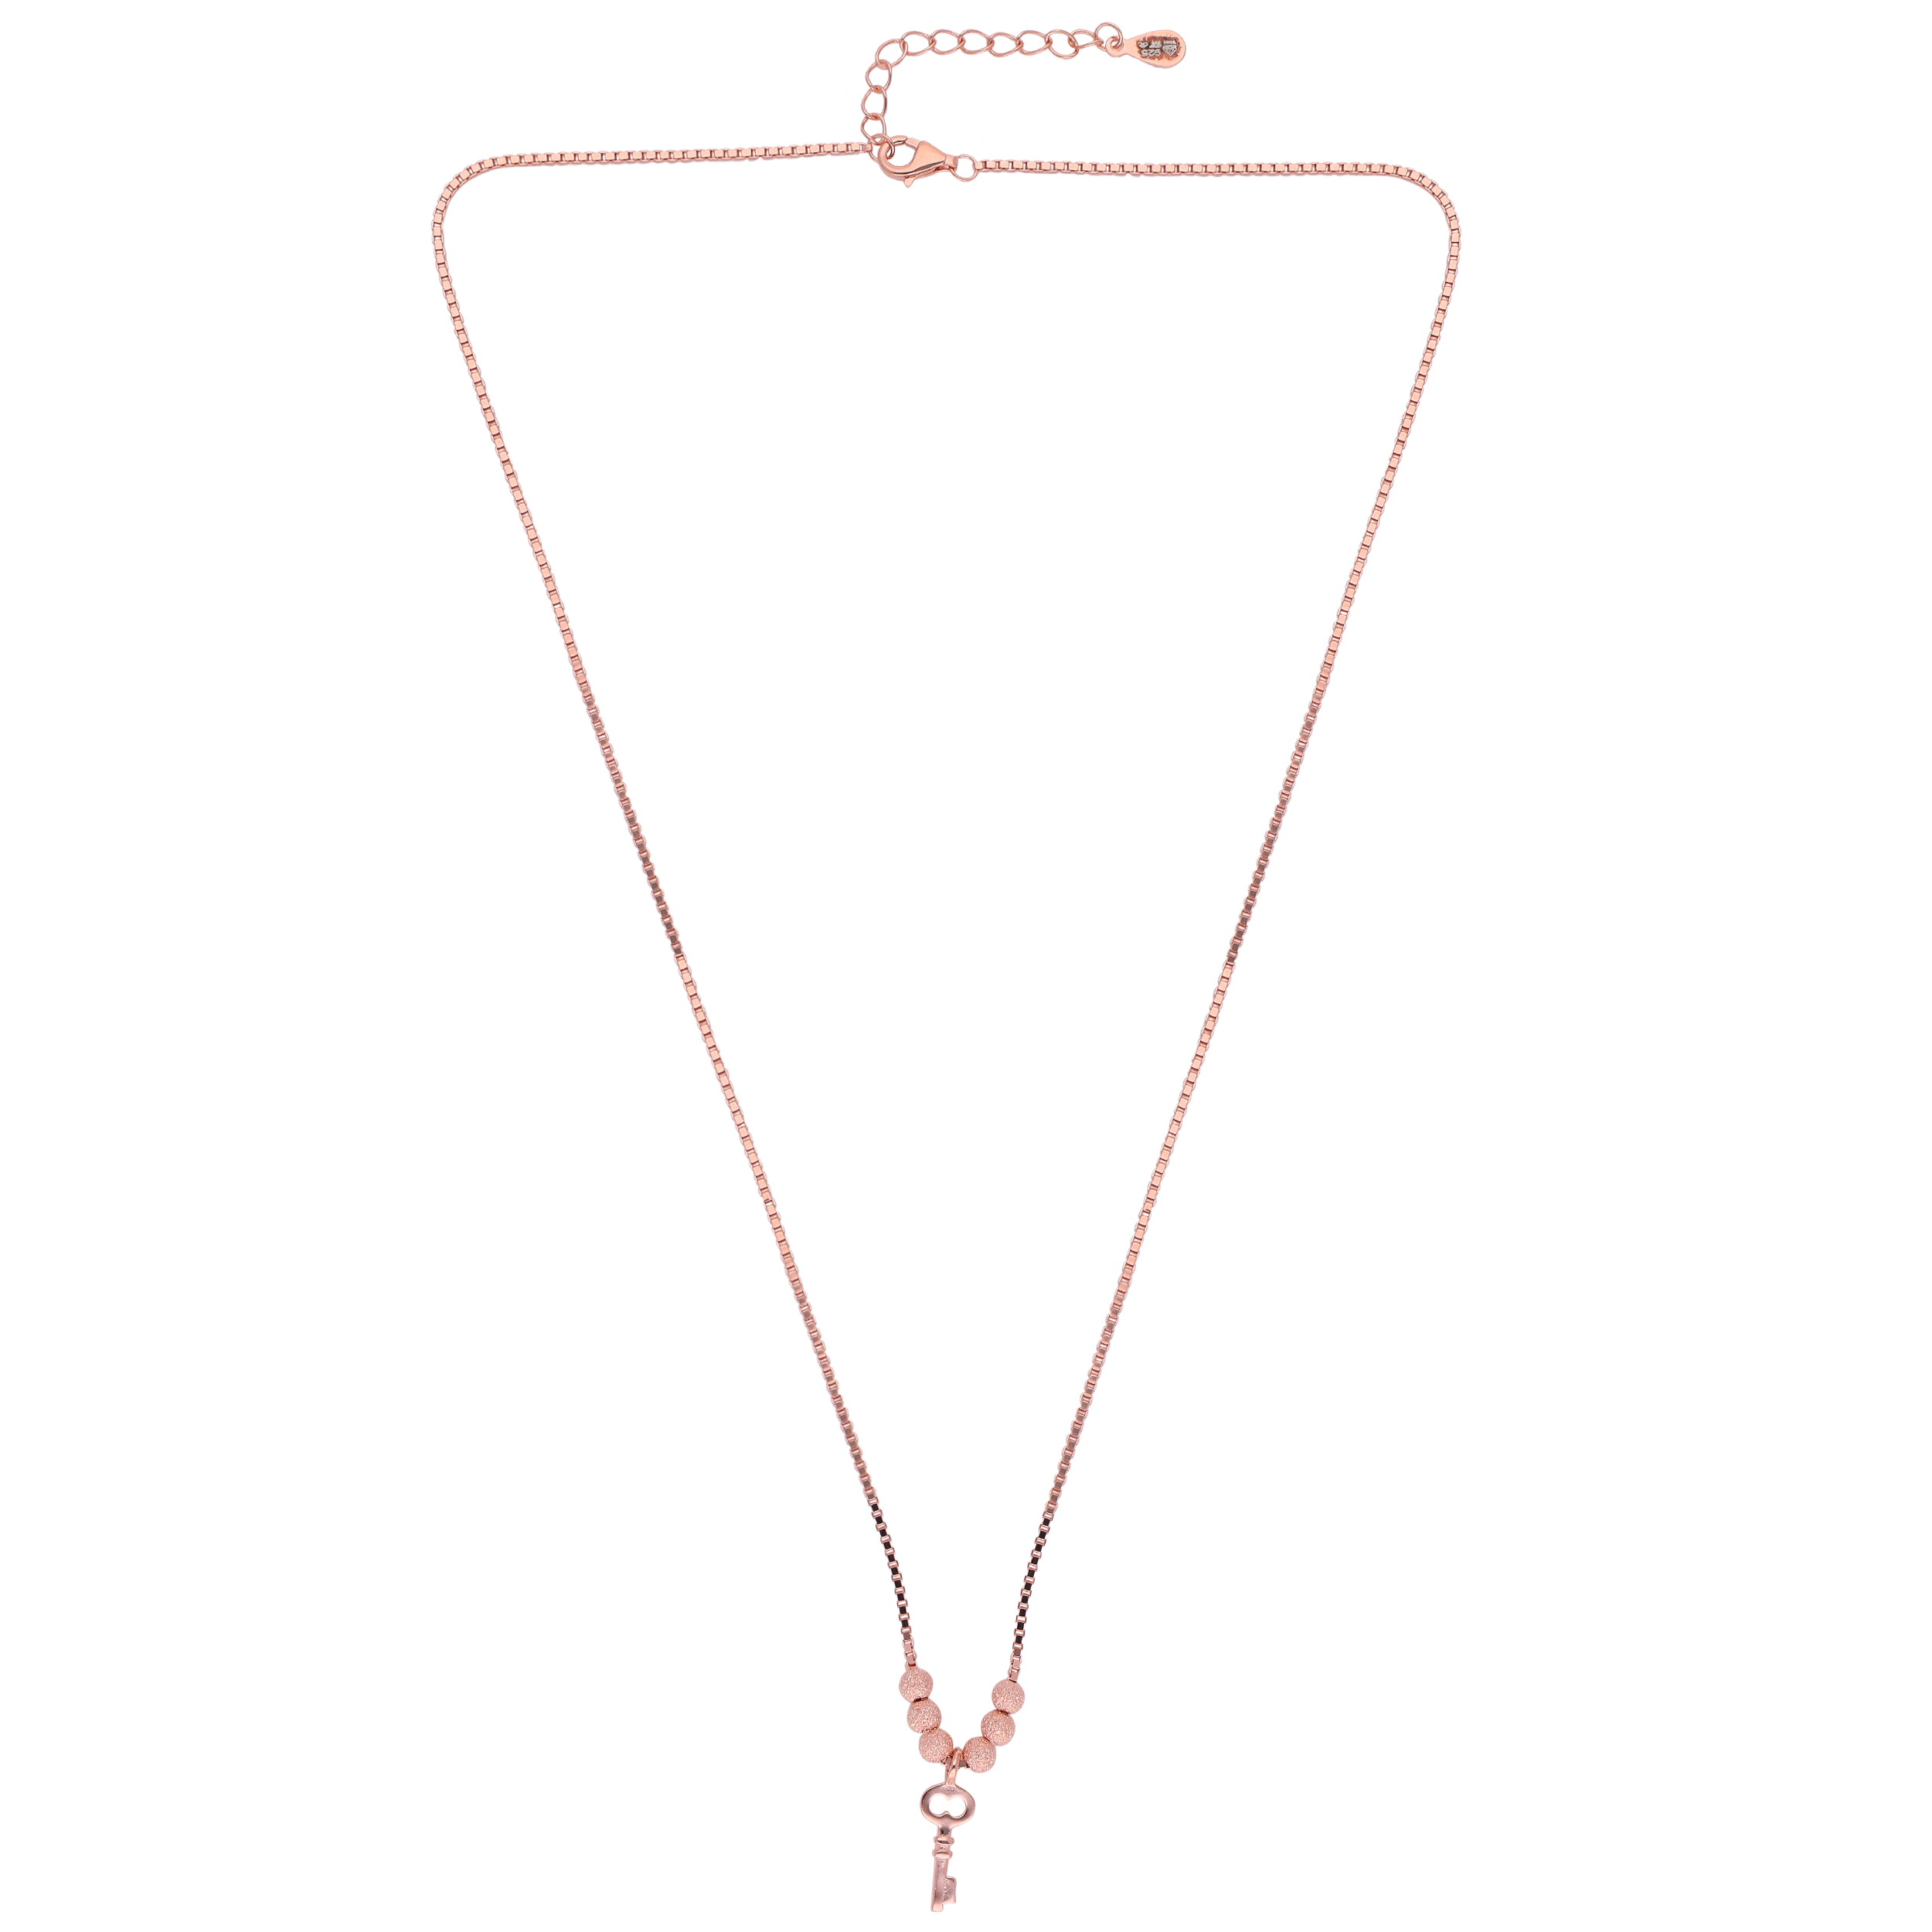 Key Pendant Chain with Rose Gold Finish | SKU: 0019281667, 0019281629